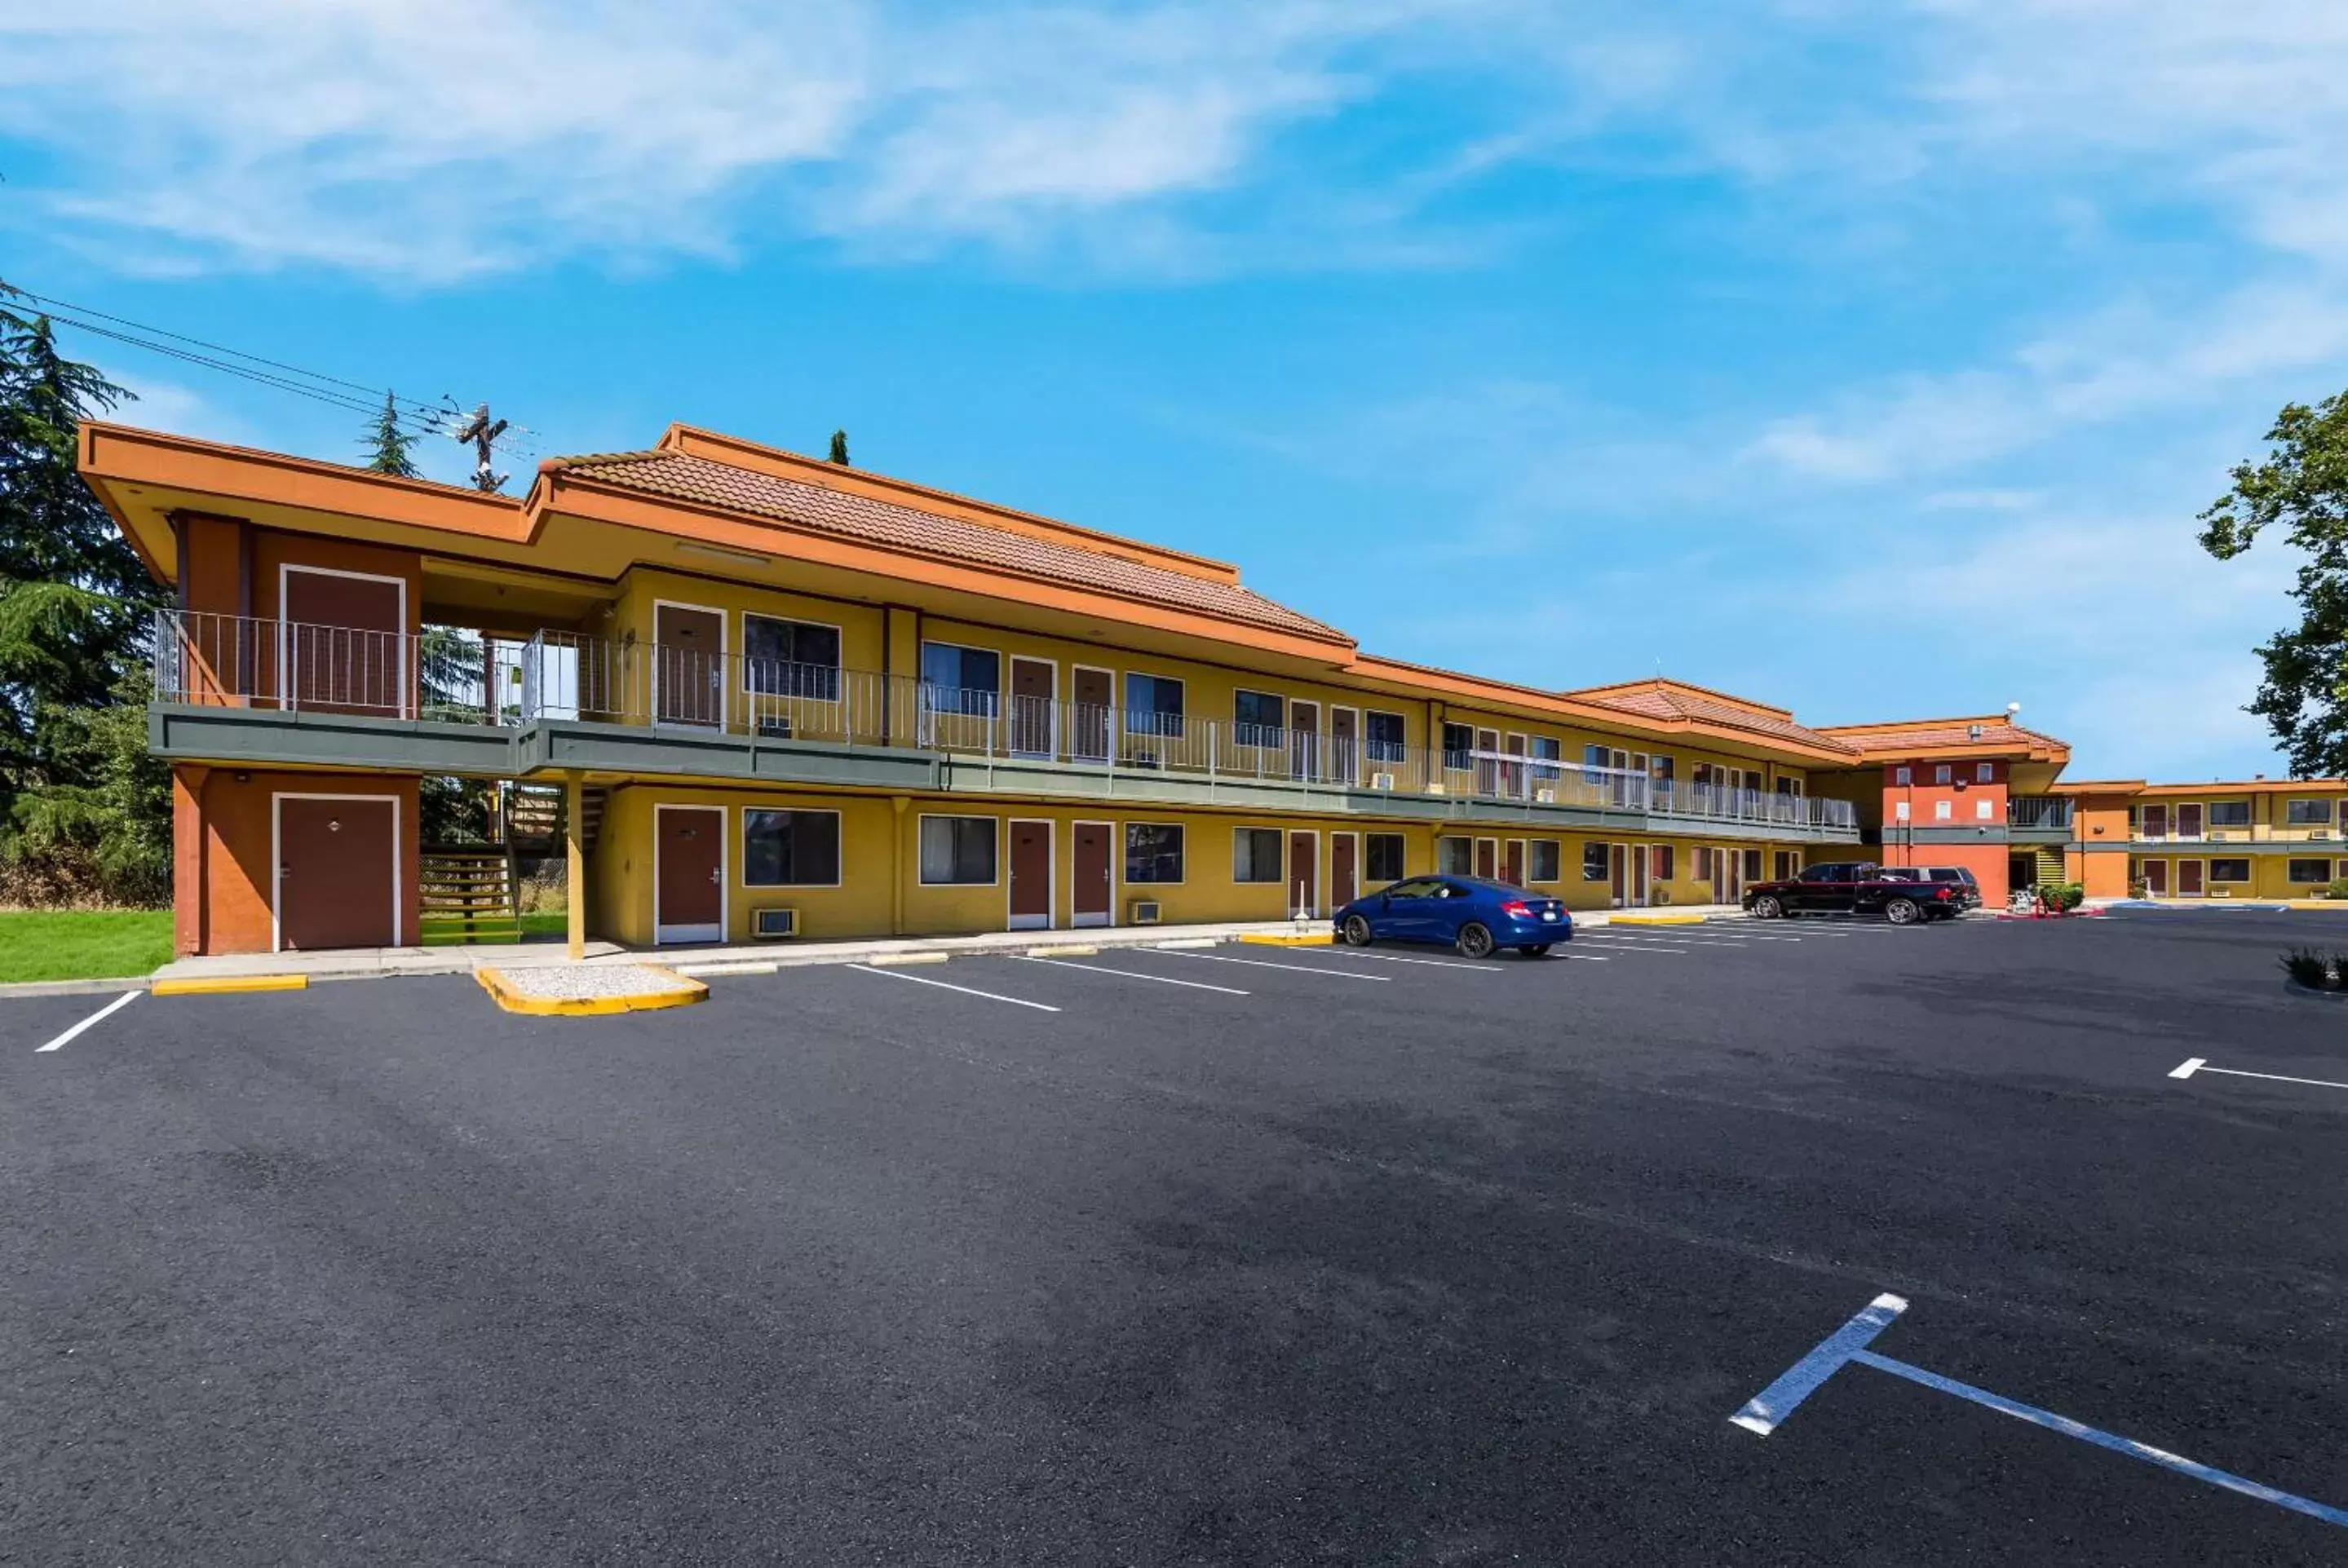 Property Building in Rodeway Inn Livermore